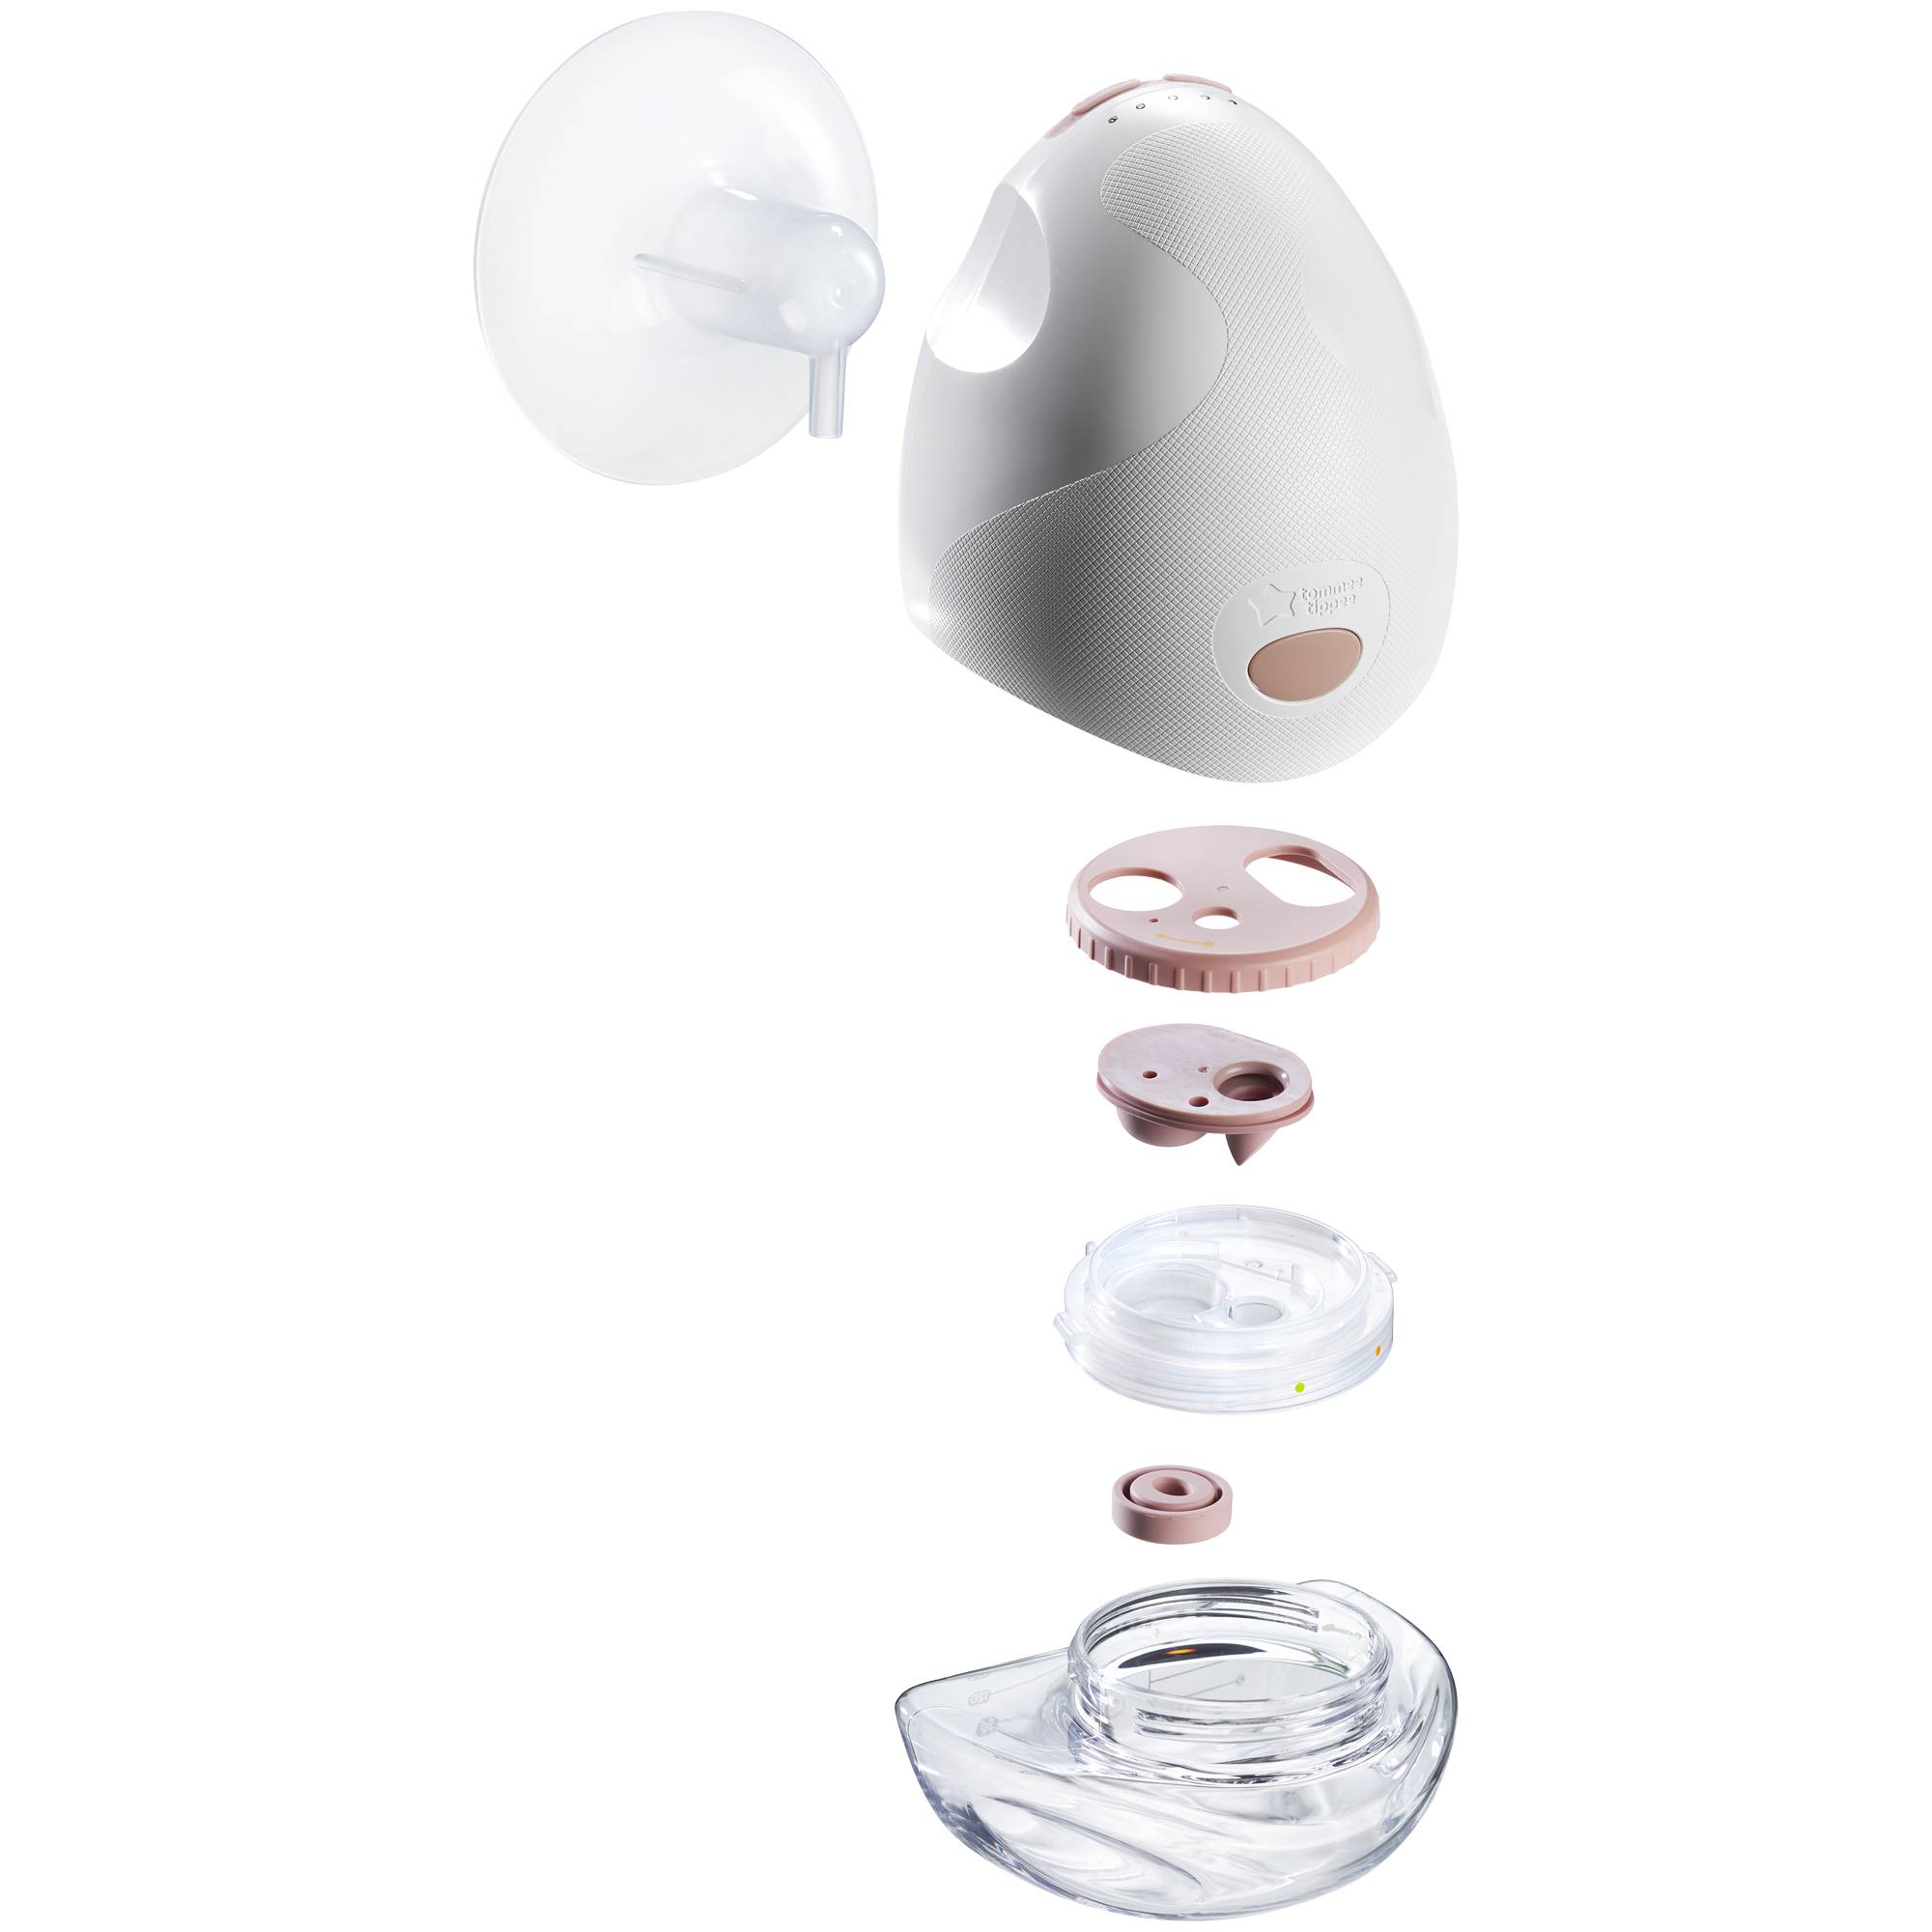 Tommee Tippee Made For Me In Bra Wearable Breast Pump *see